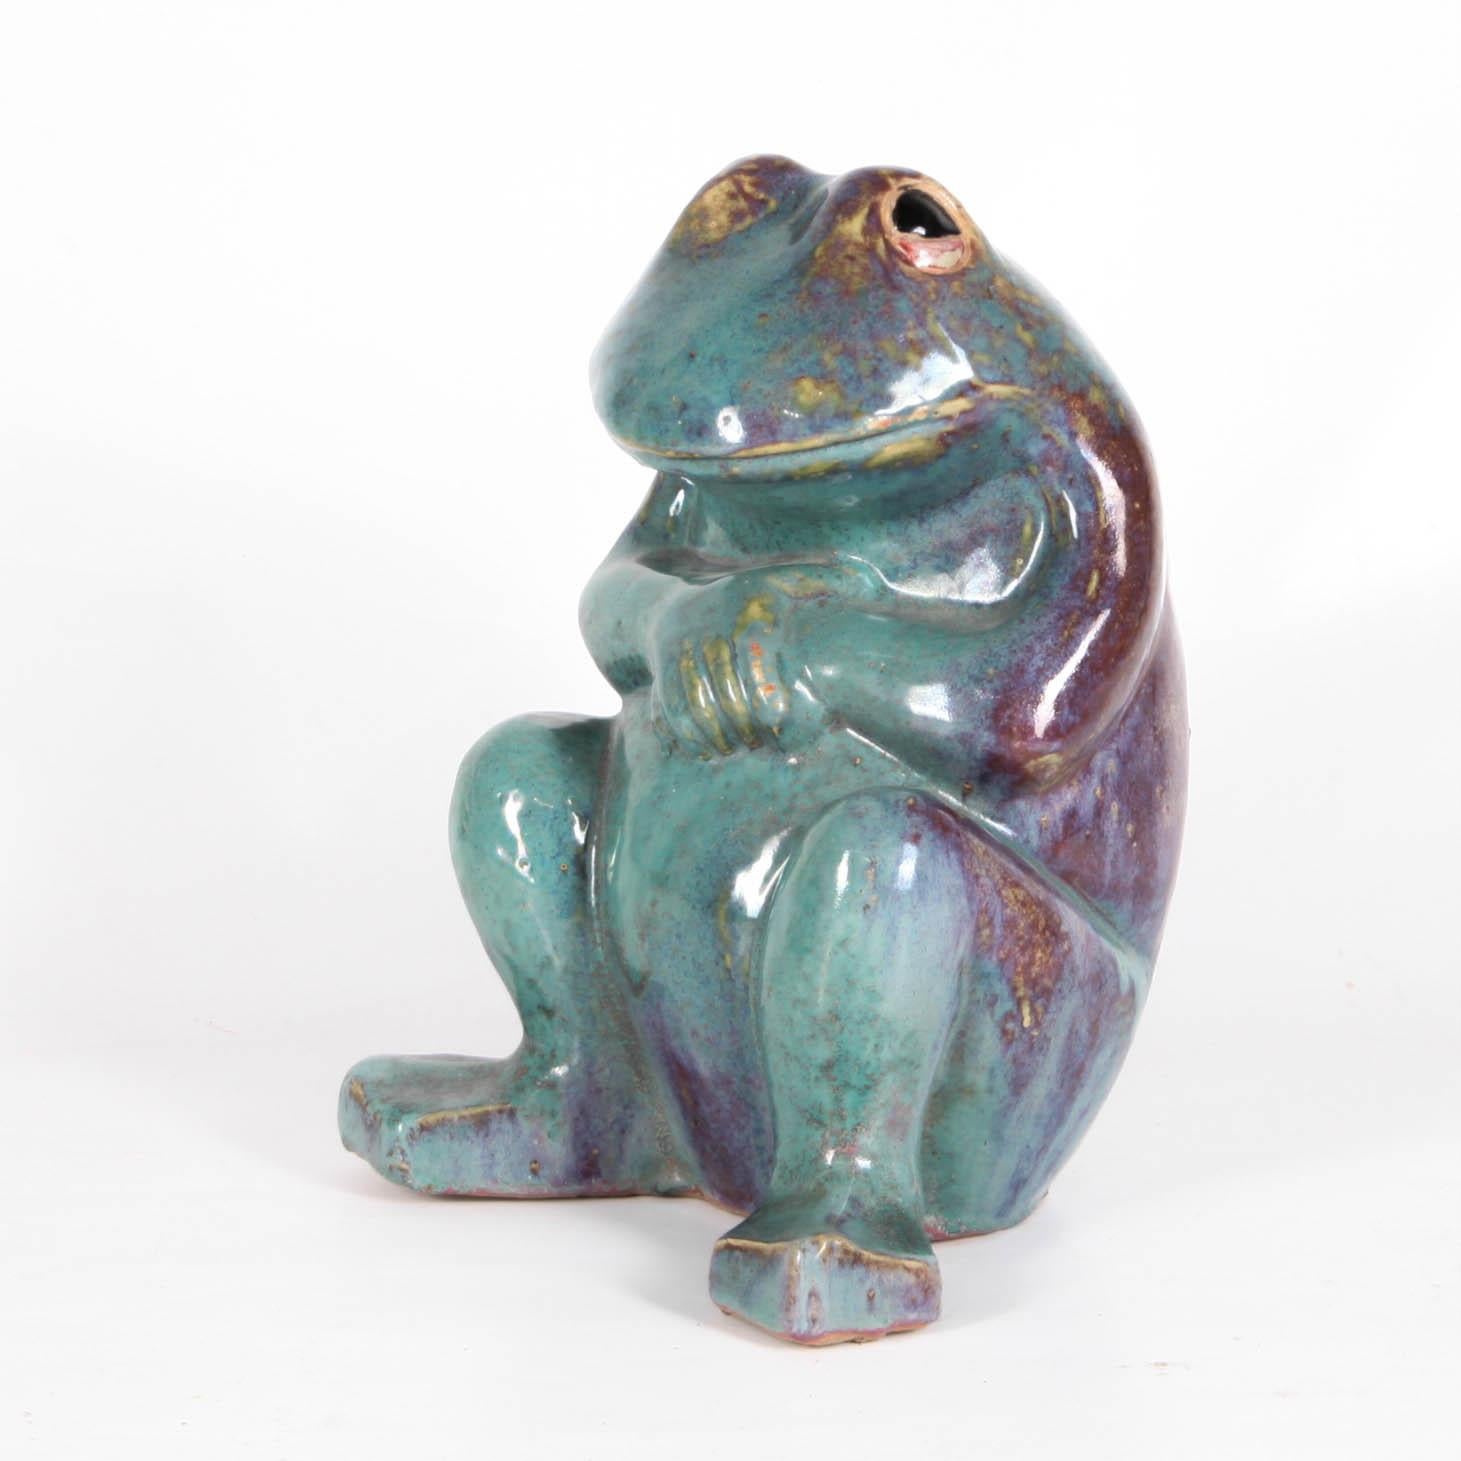 Enamelled earthenware sculpture attributed to Clément Massier circa 1900